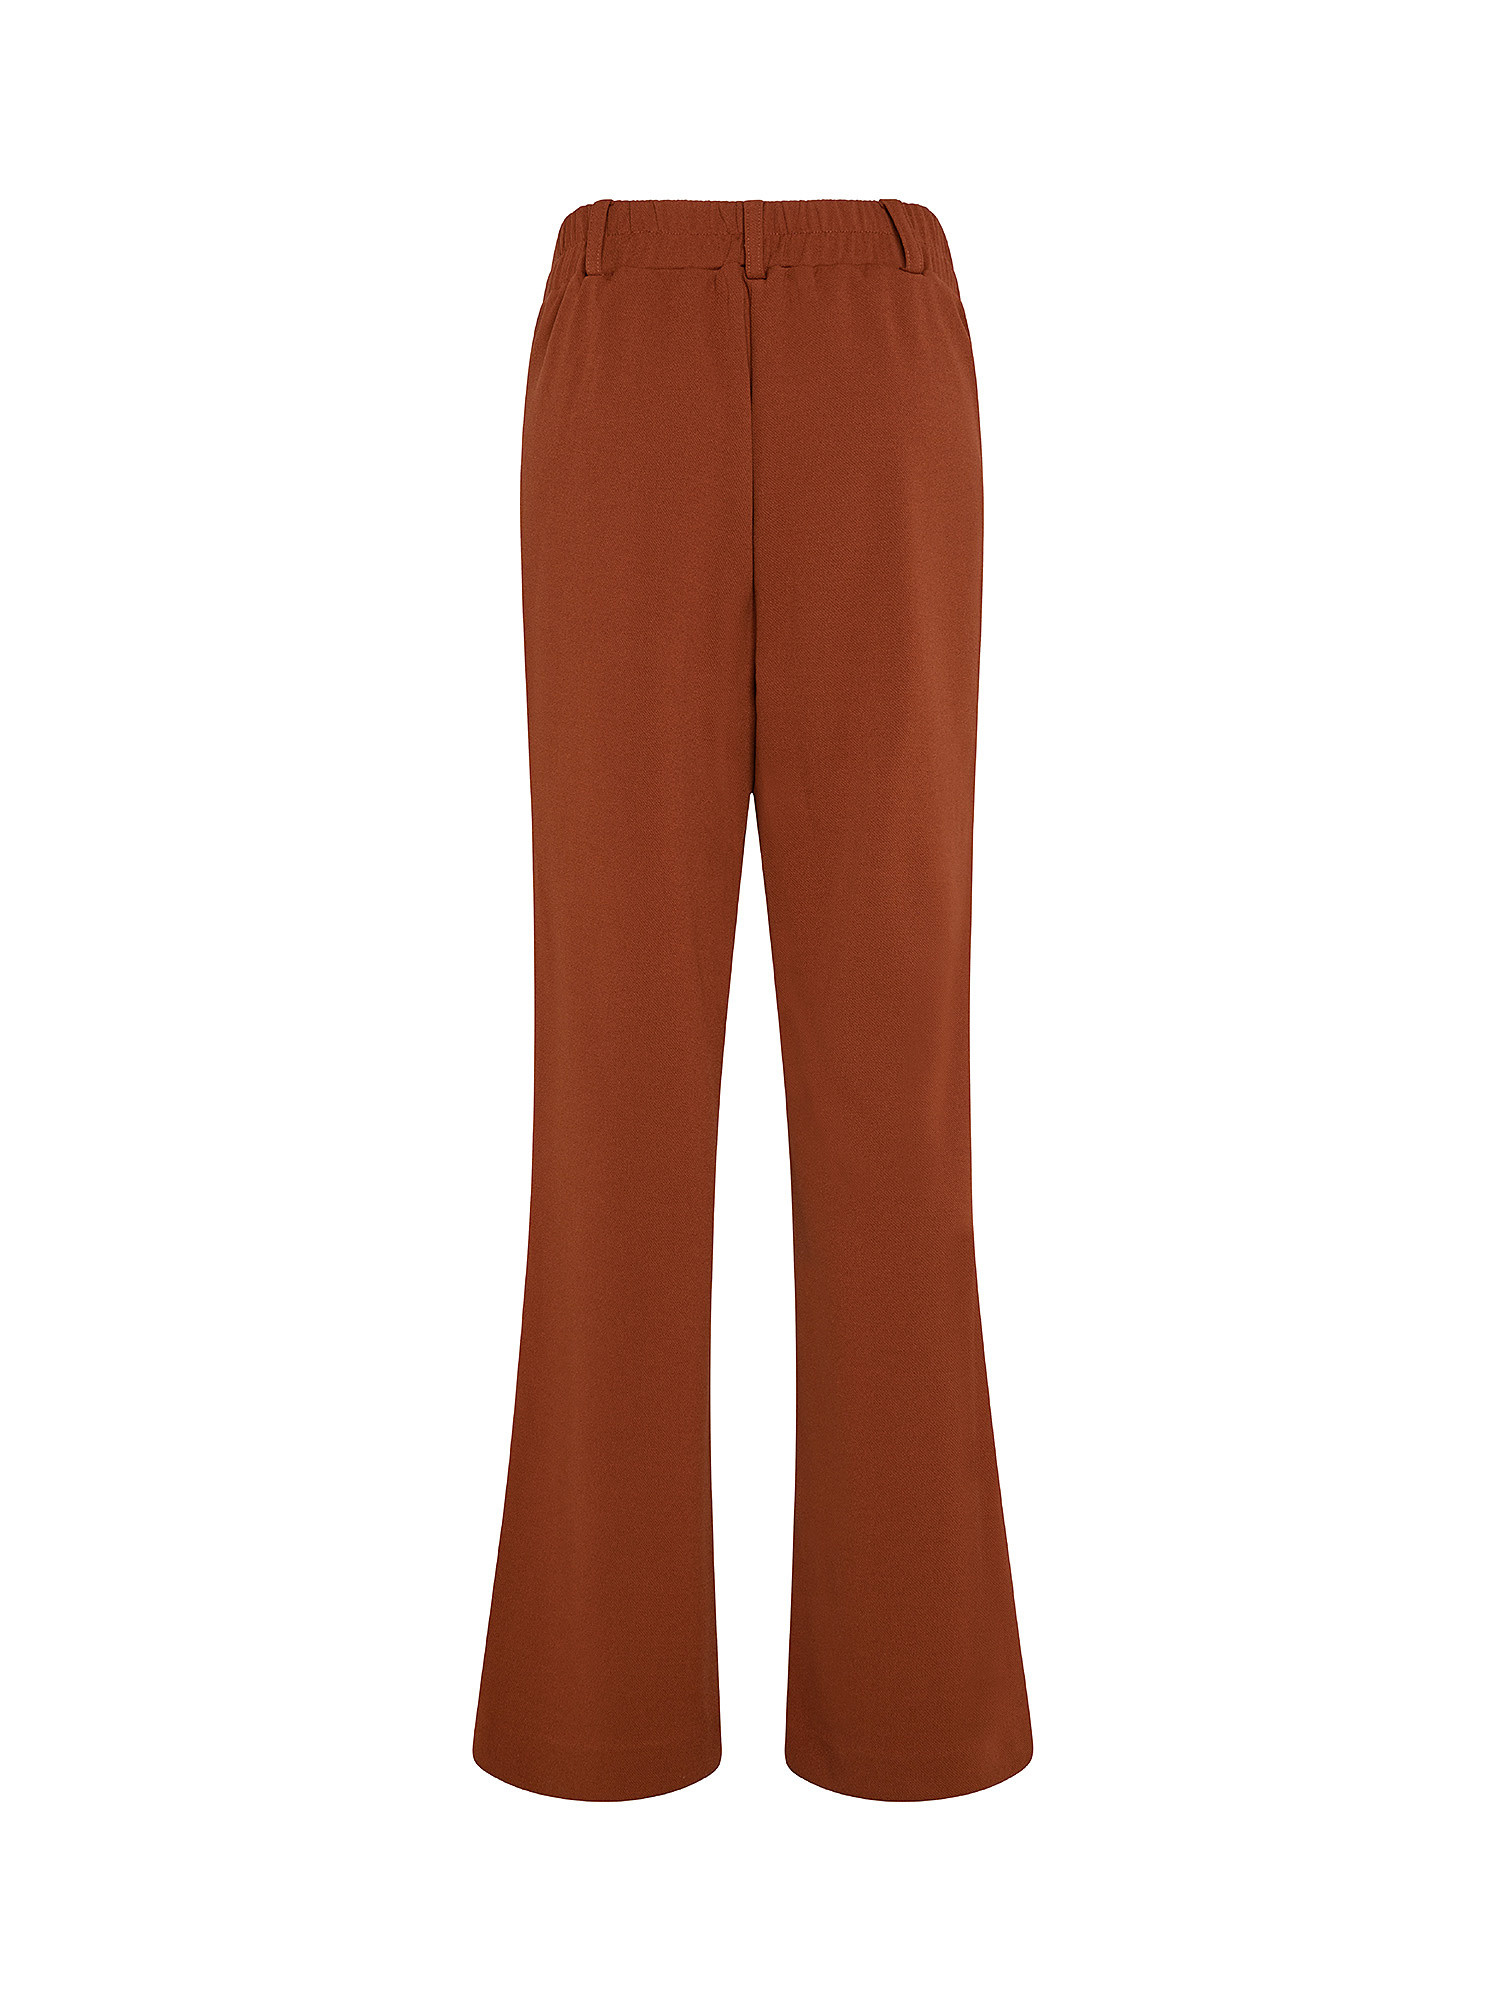 Trousers with elastic, Light Brown, large image number 1